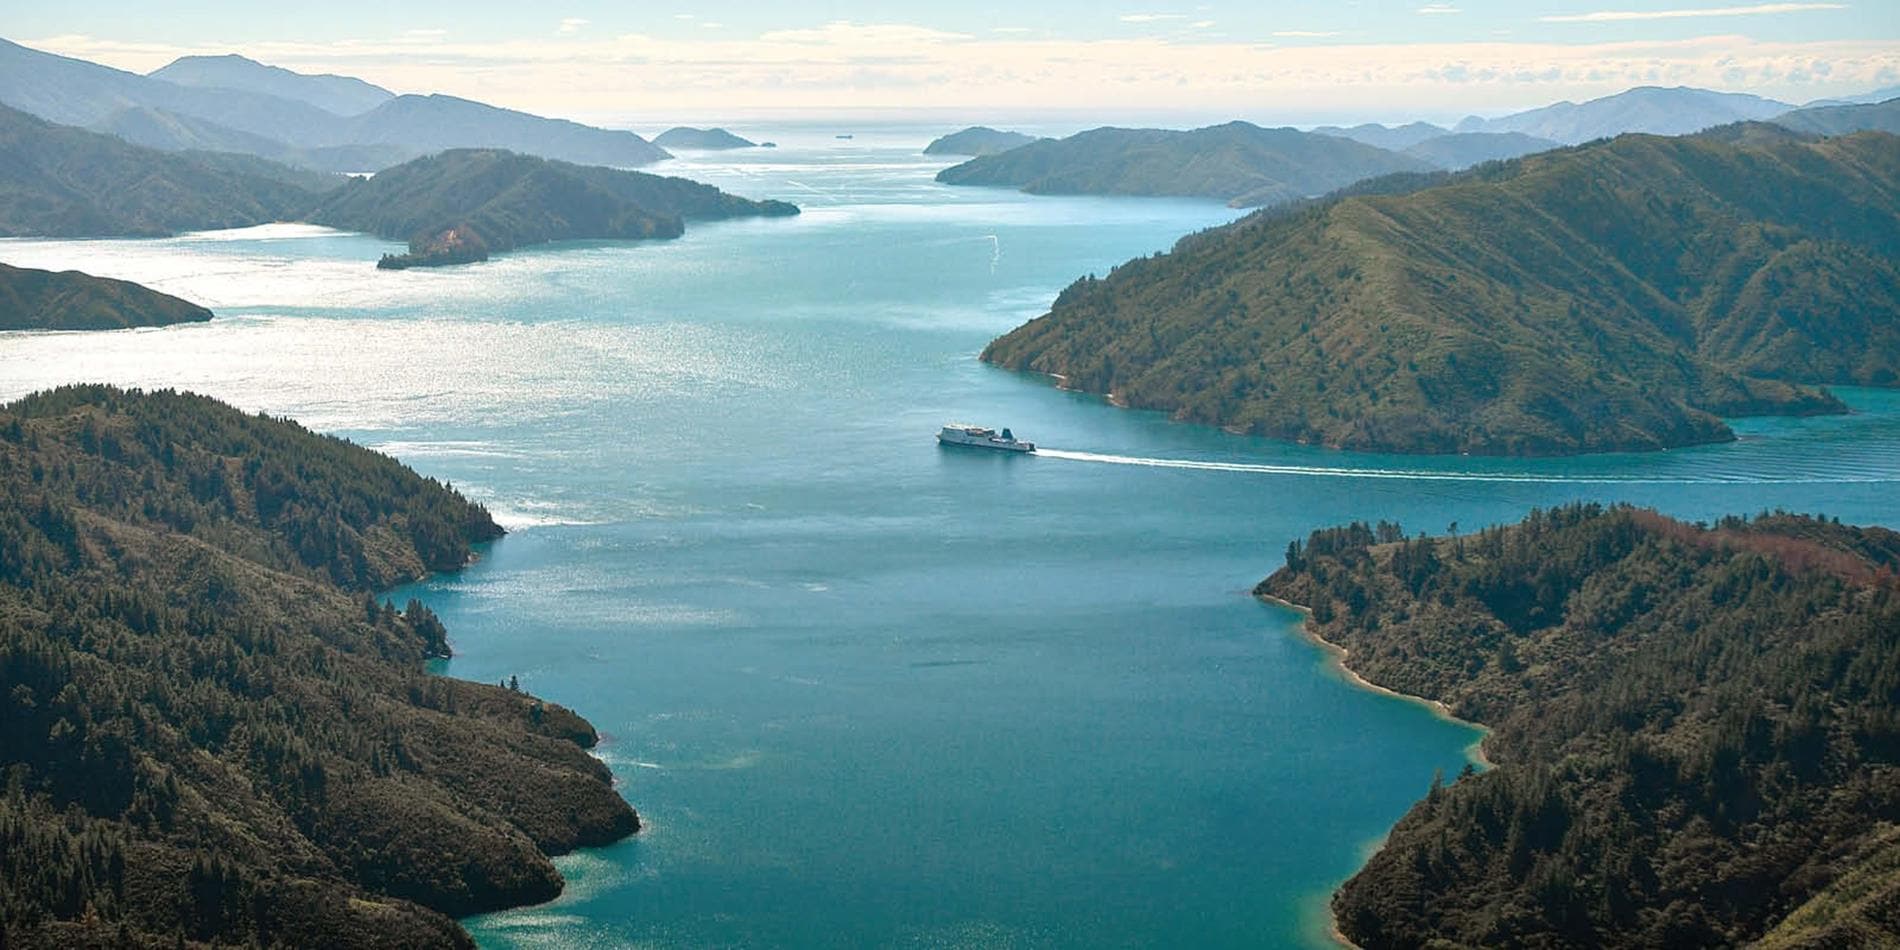 A distant view of the Interislander Ferry cruising past land formations